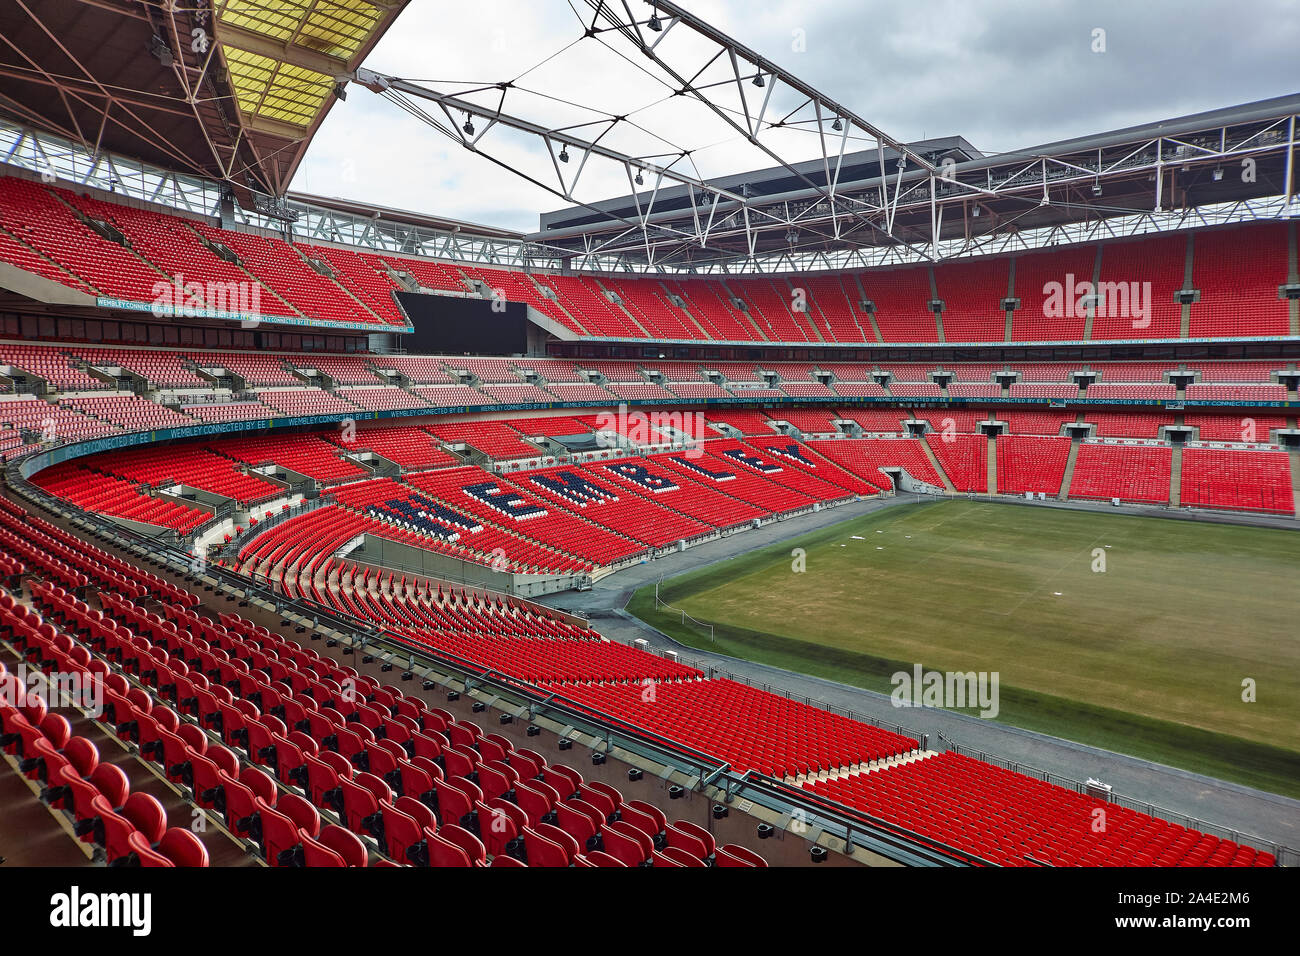 Wembley stadium is a football stadium in Wembley, London, which opened in 2007. Stock Photo